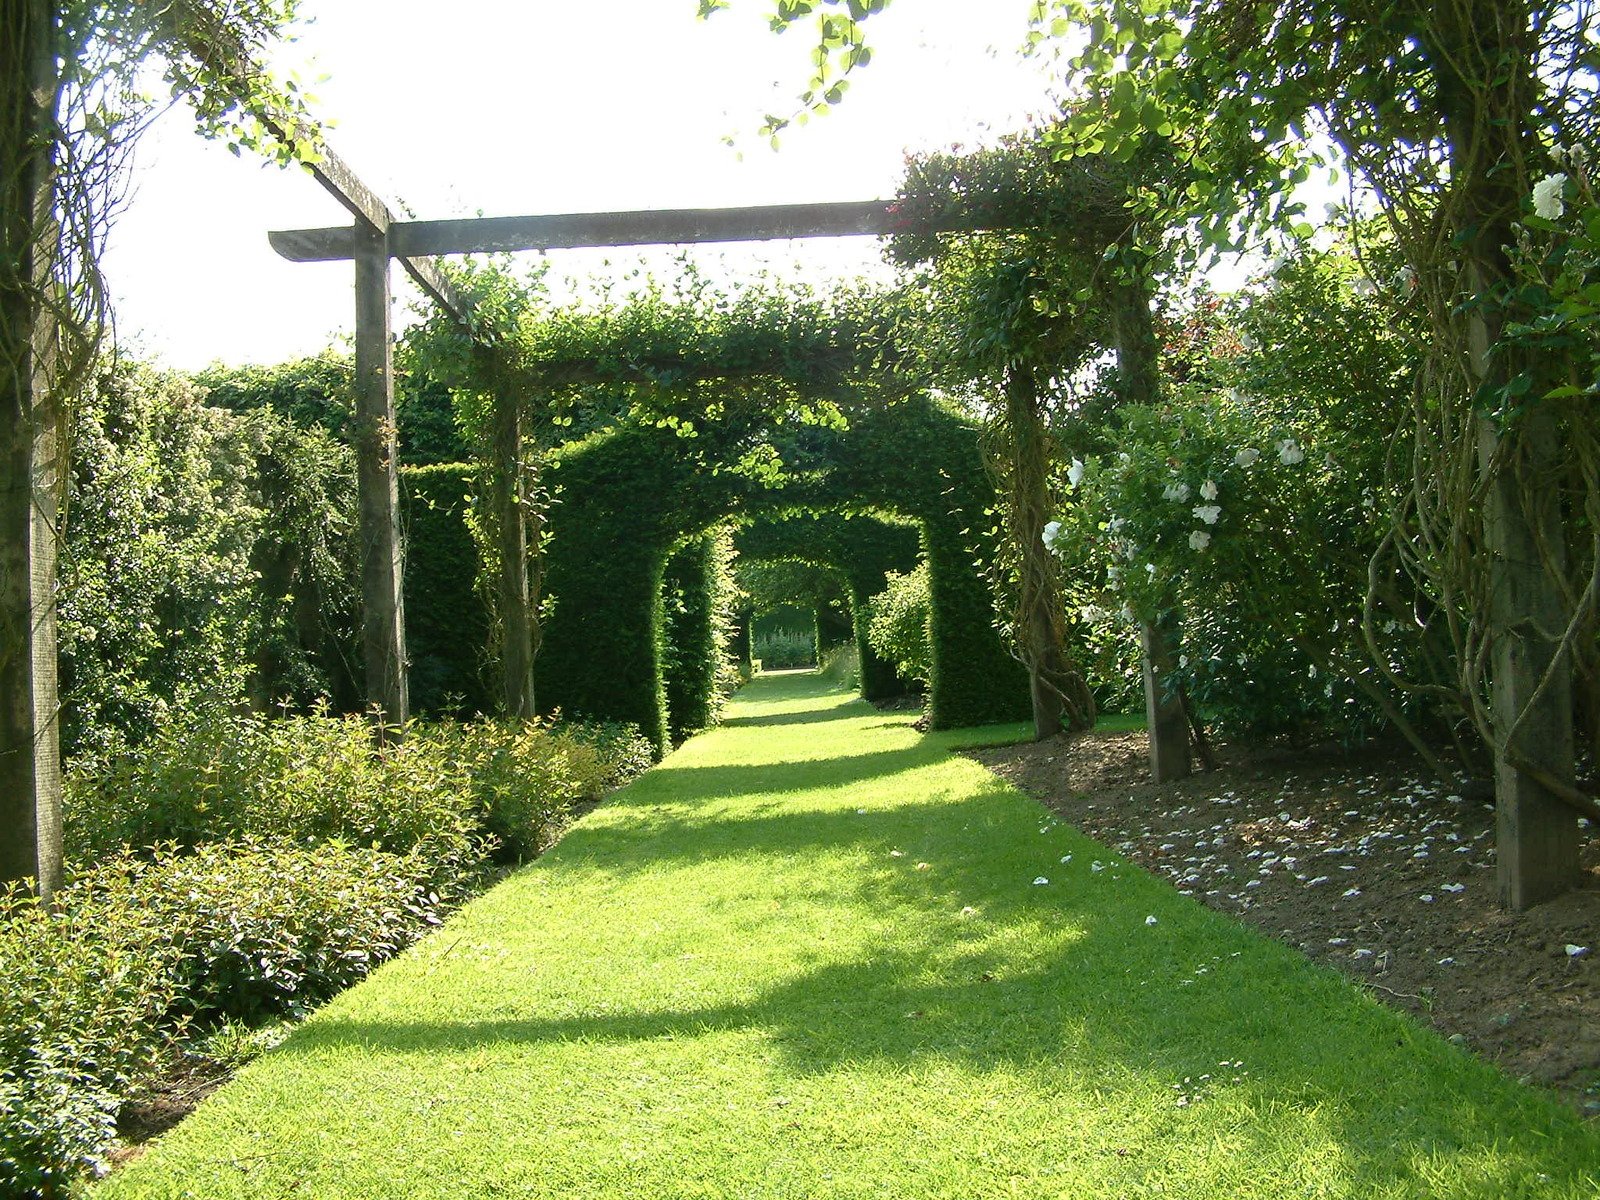 an arch leads out into a beautiful garden